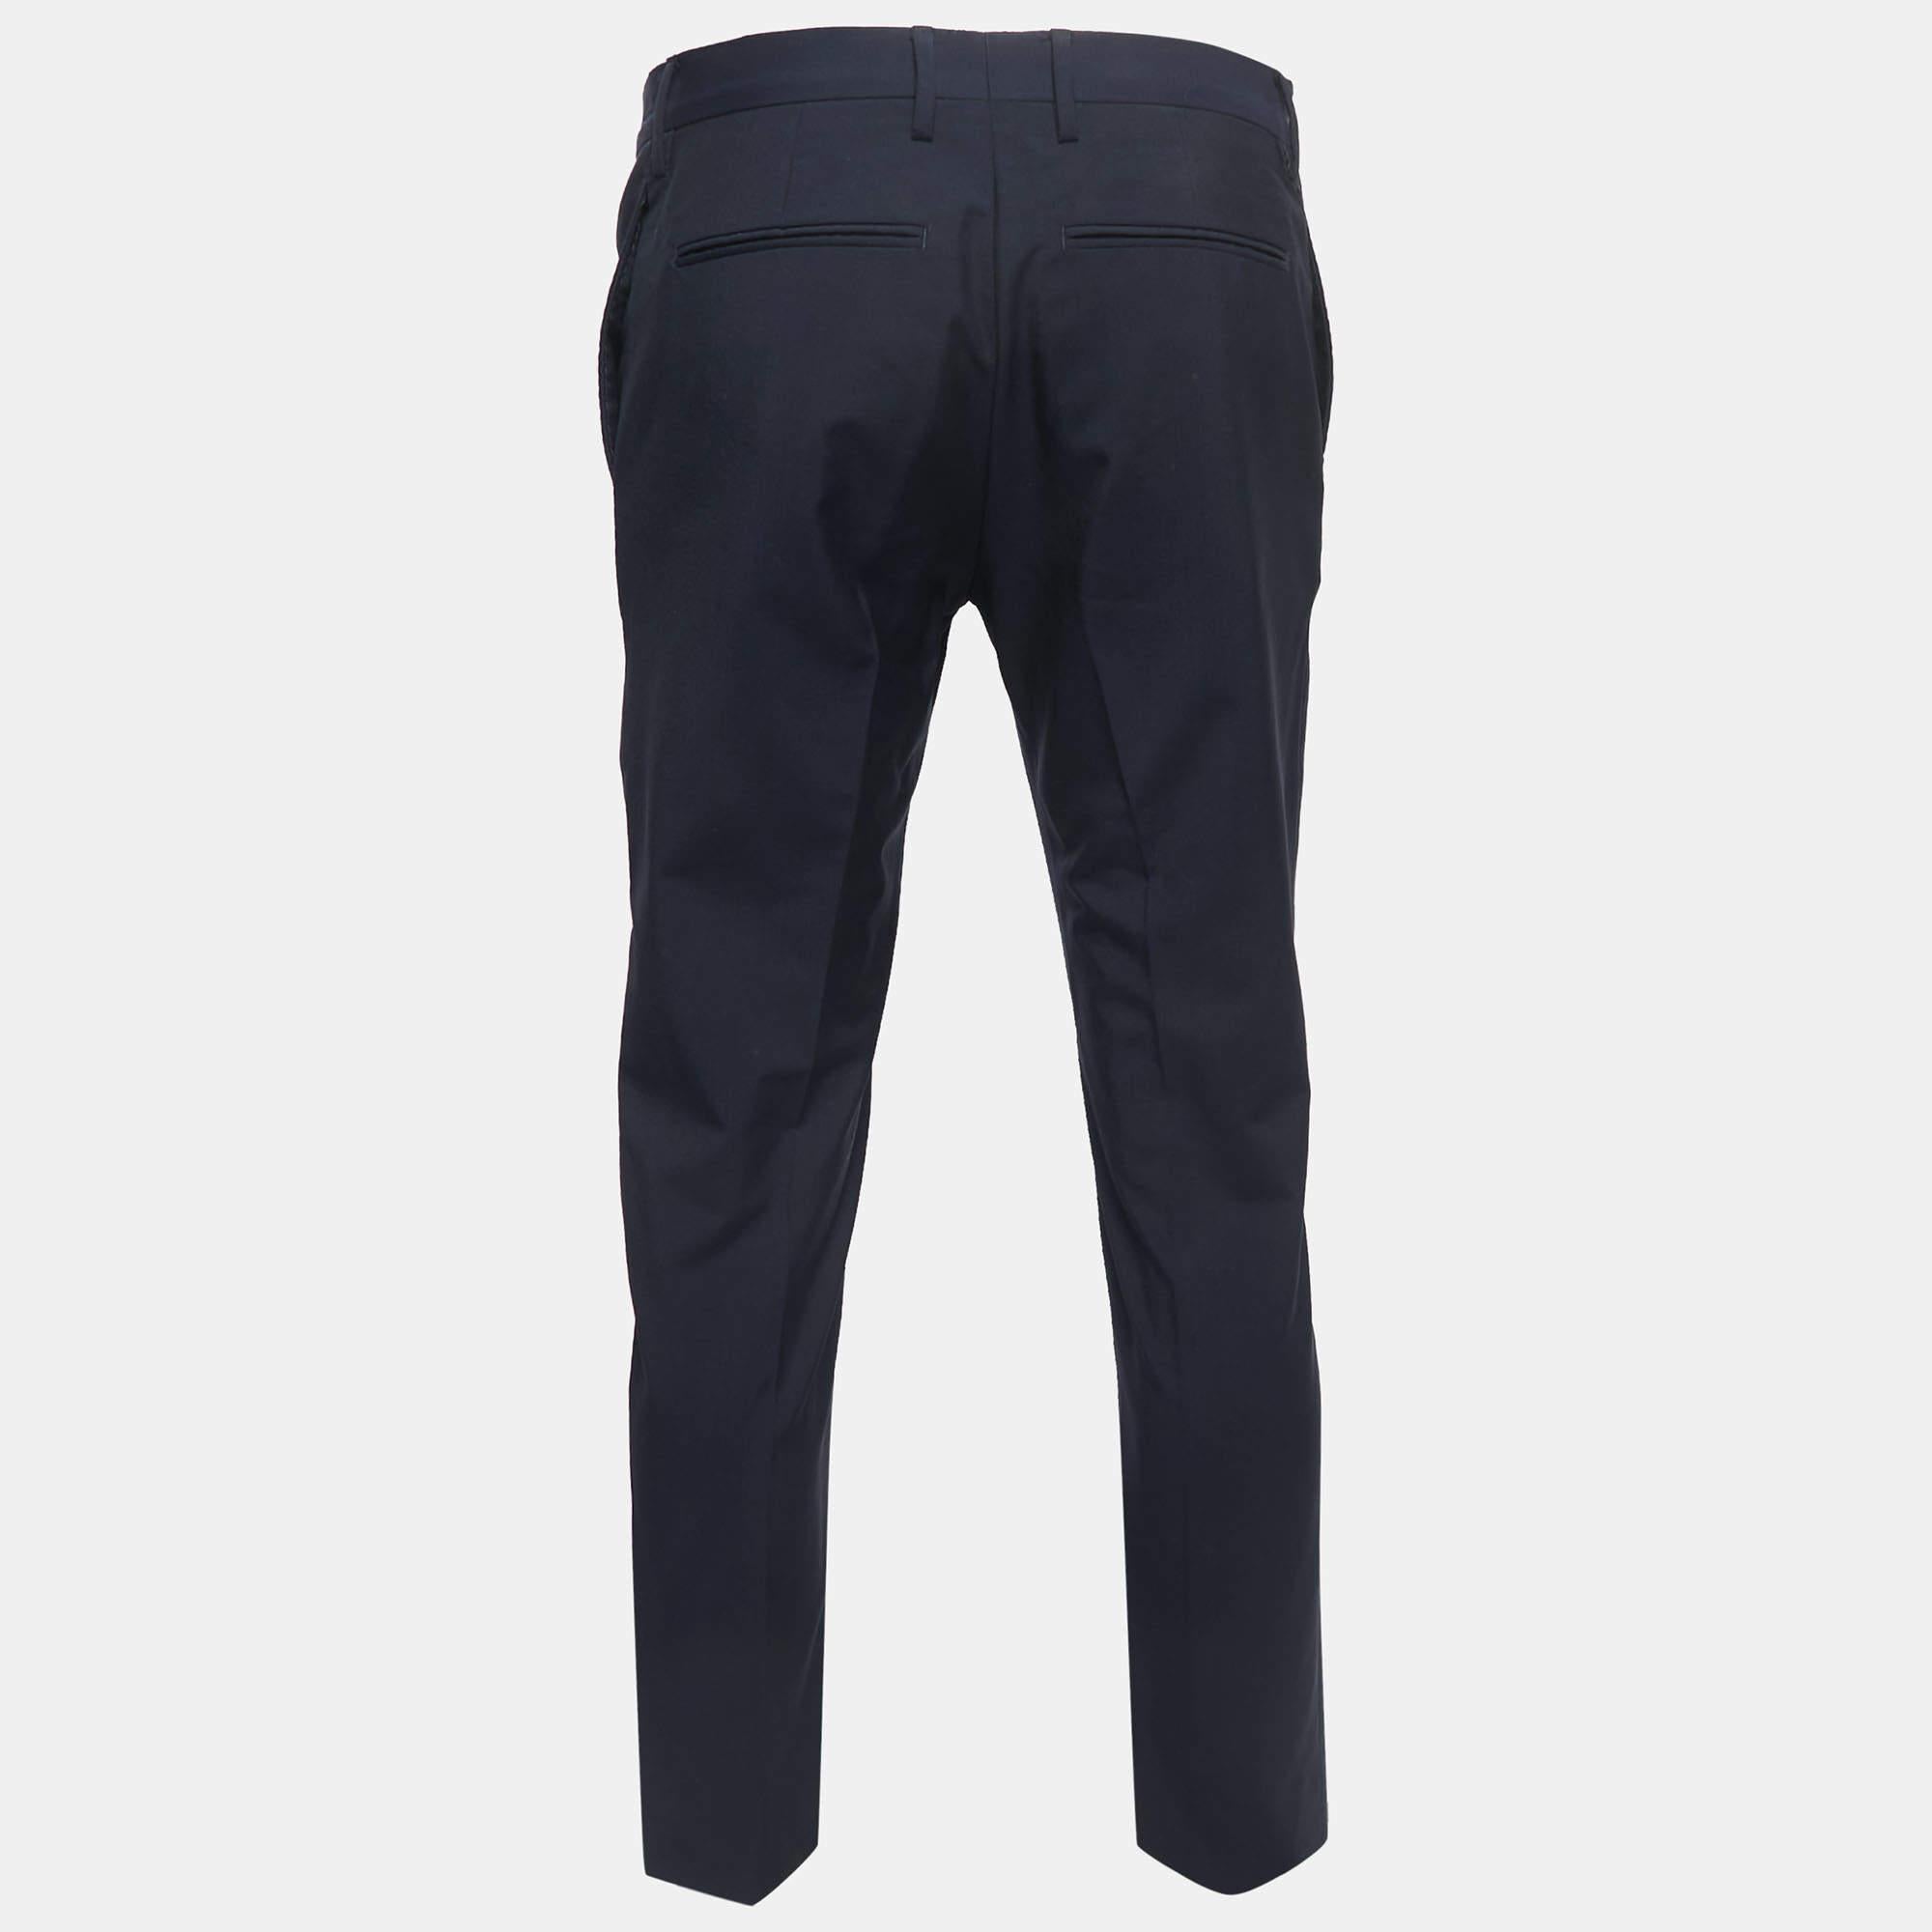 Enhance your formal attire with this pair of trousers. Designed into a superb silhouette and fit, this pair of trousers will definitely make you look elegant.

